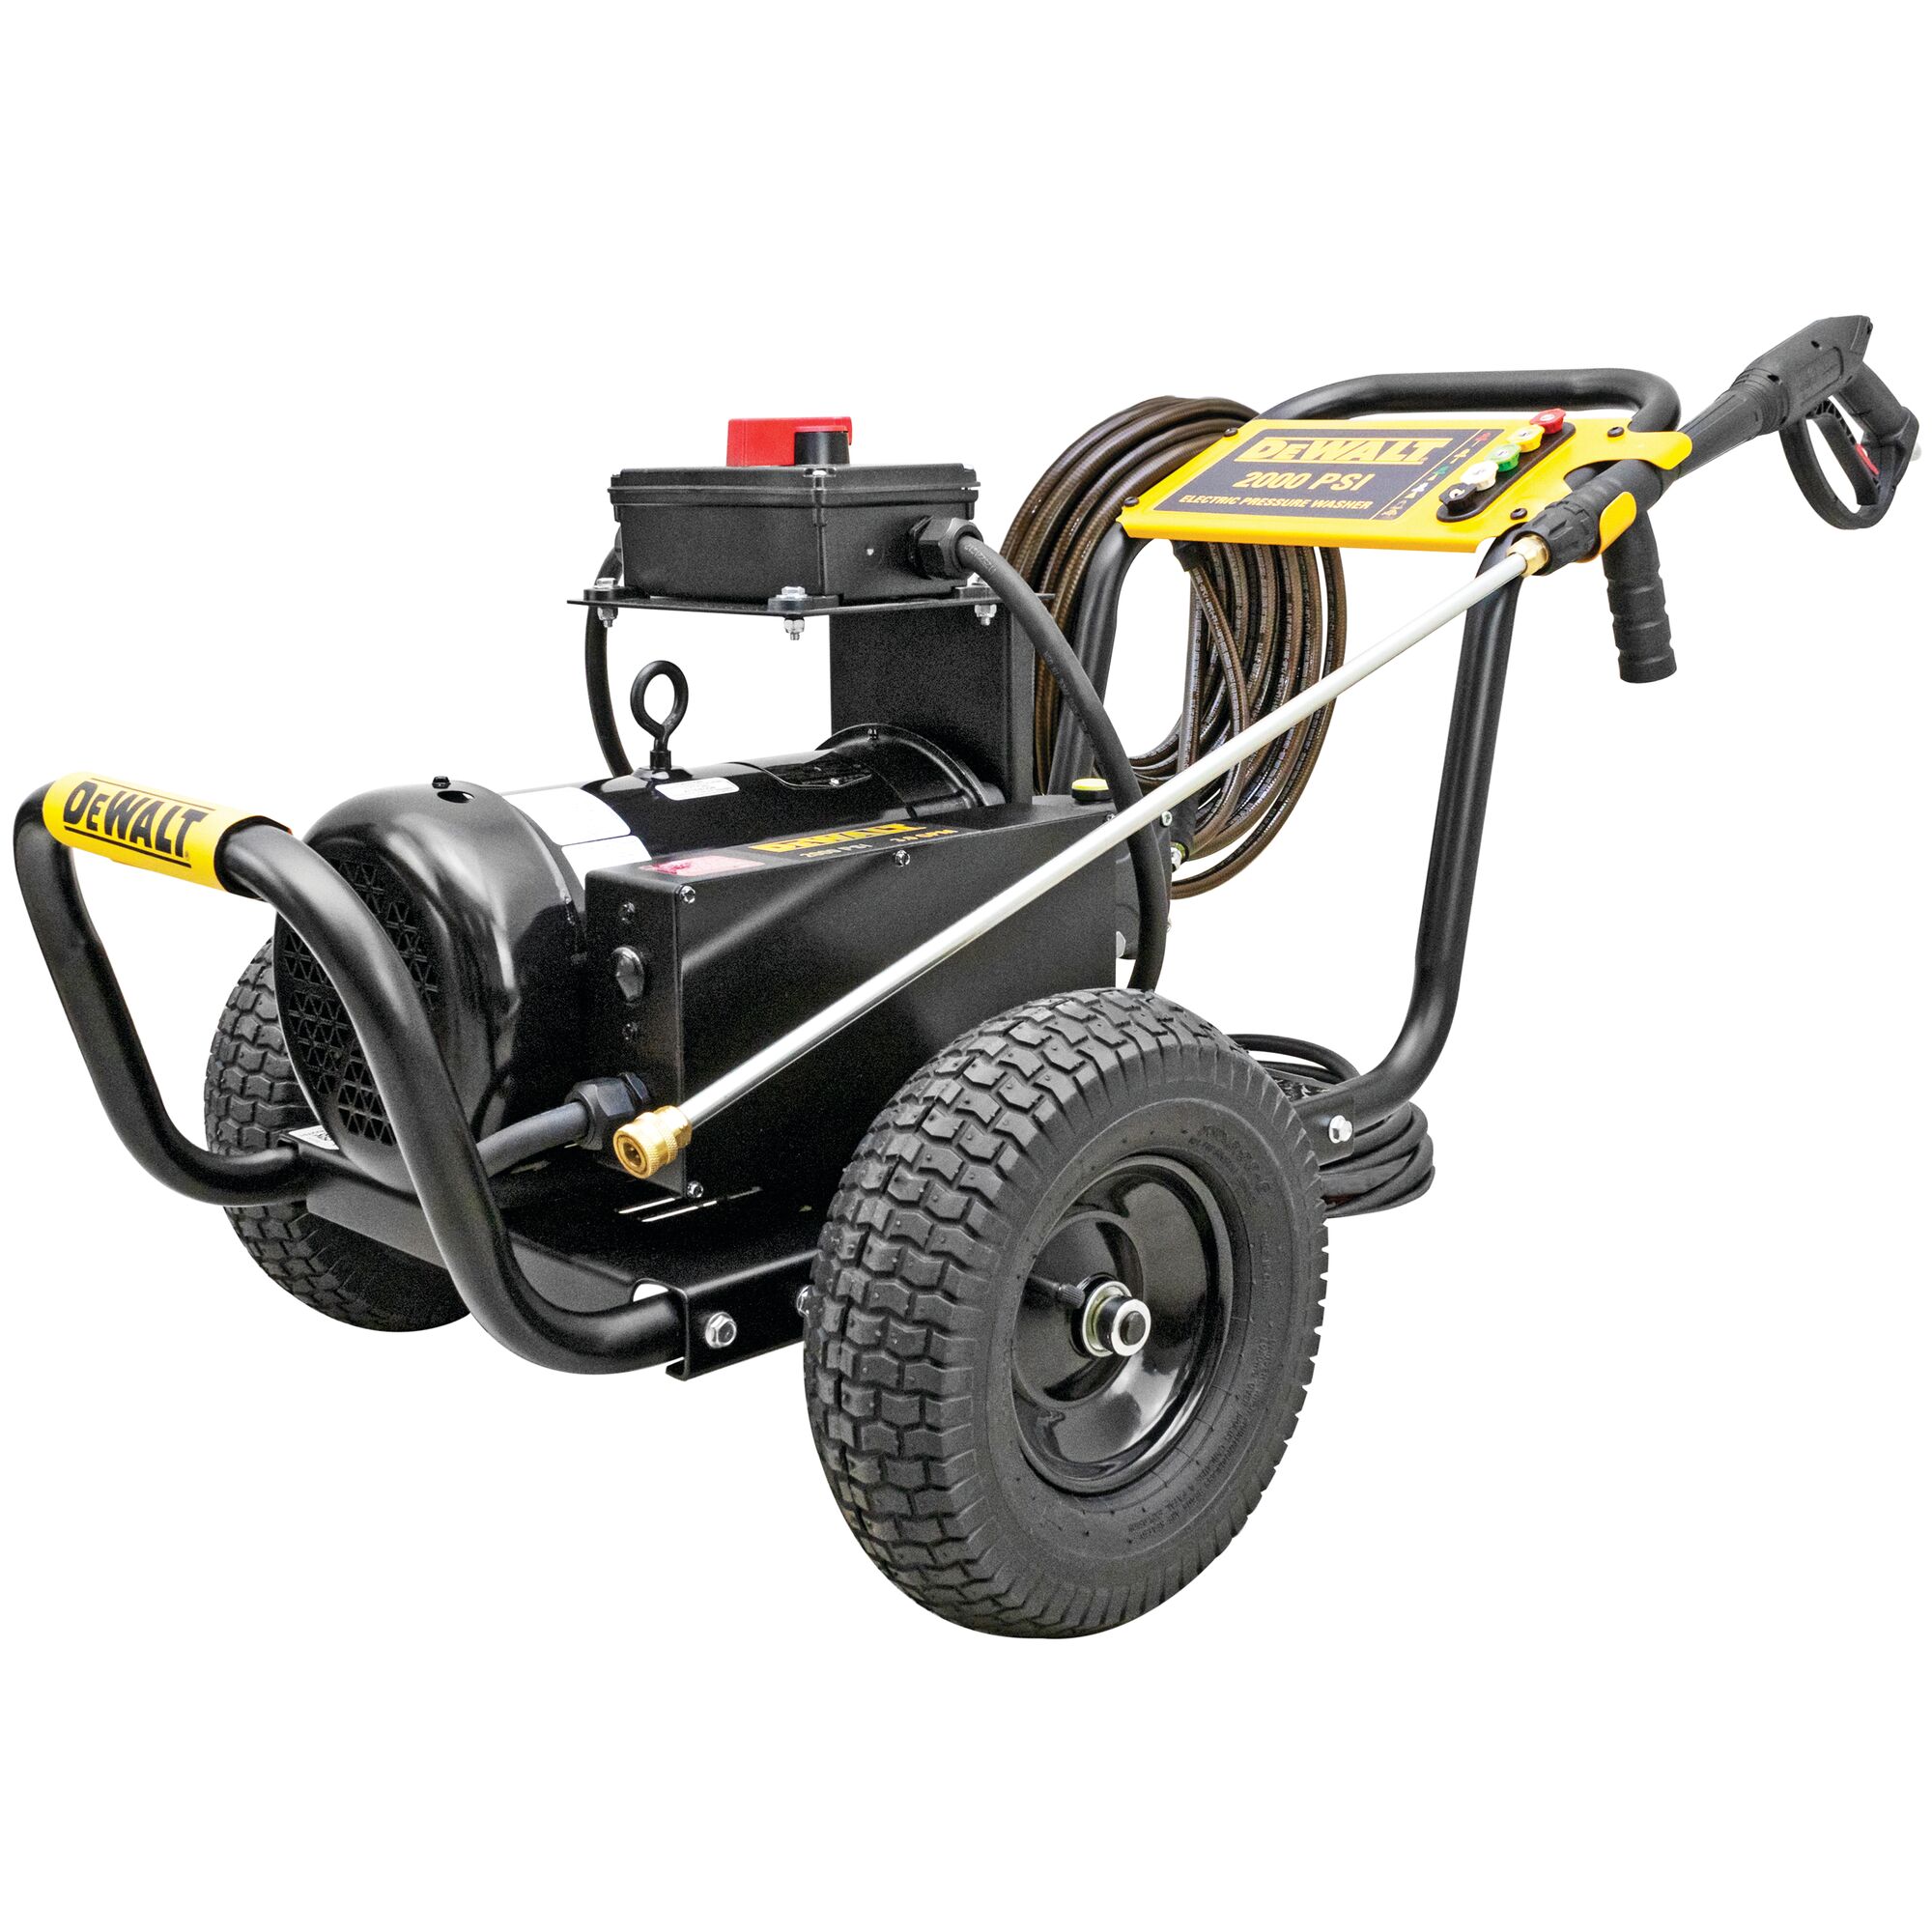 Cold Water Residential Electric Pressure Washer (2000 PSI at 3.0 GPM)